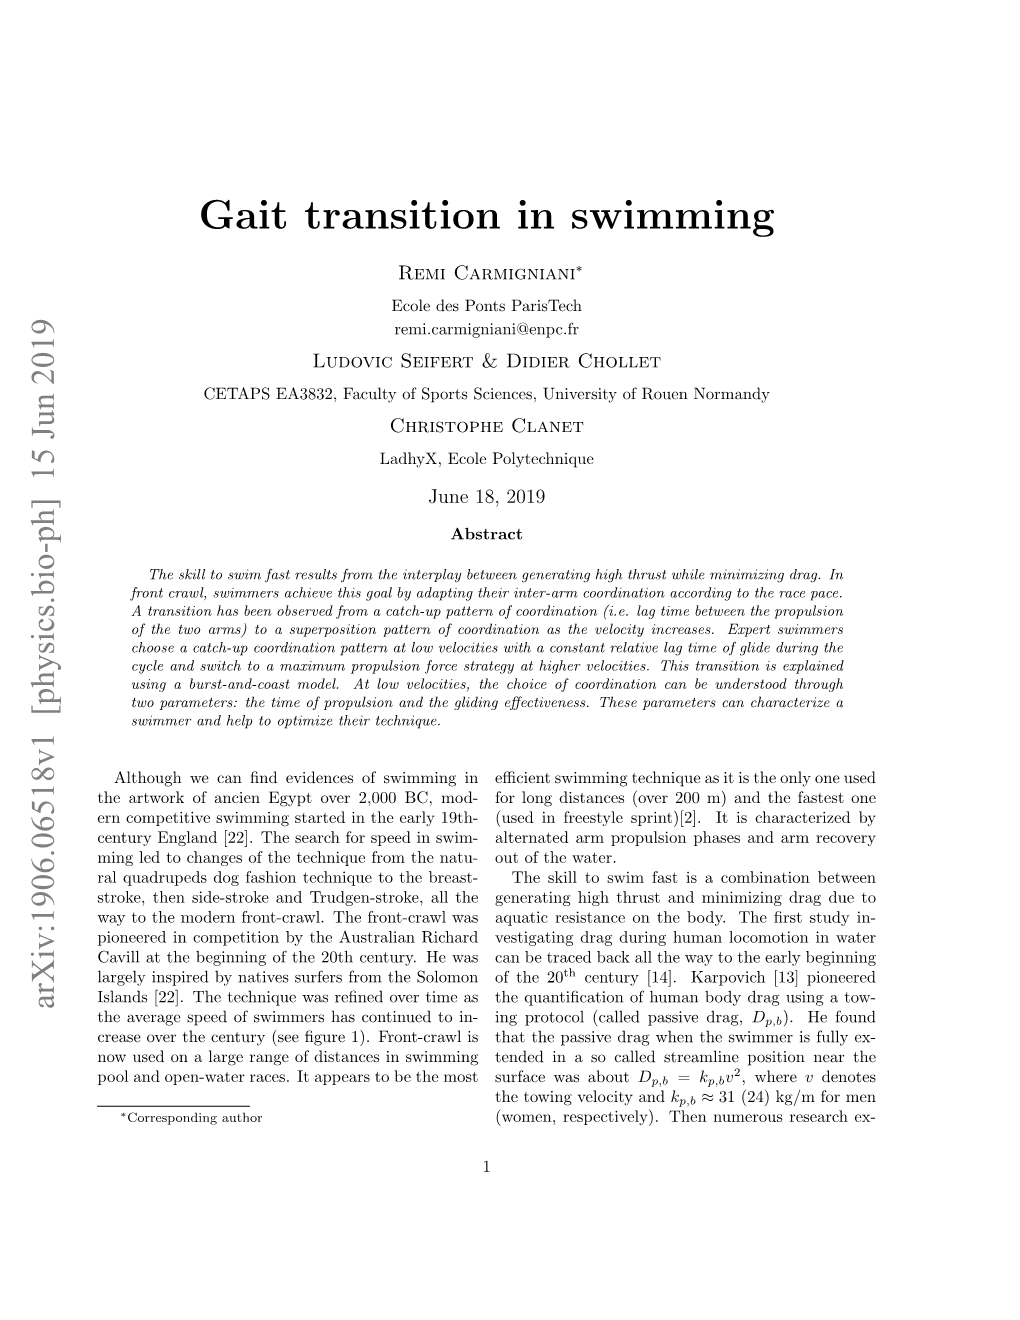 Gait Transition in Swimming